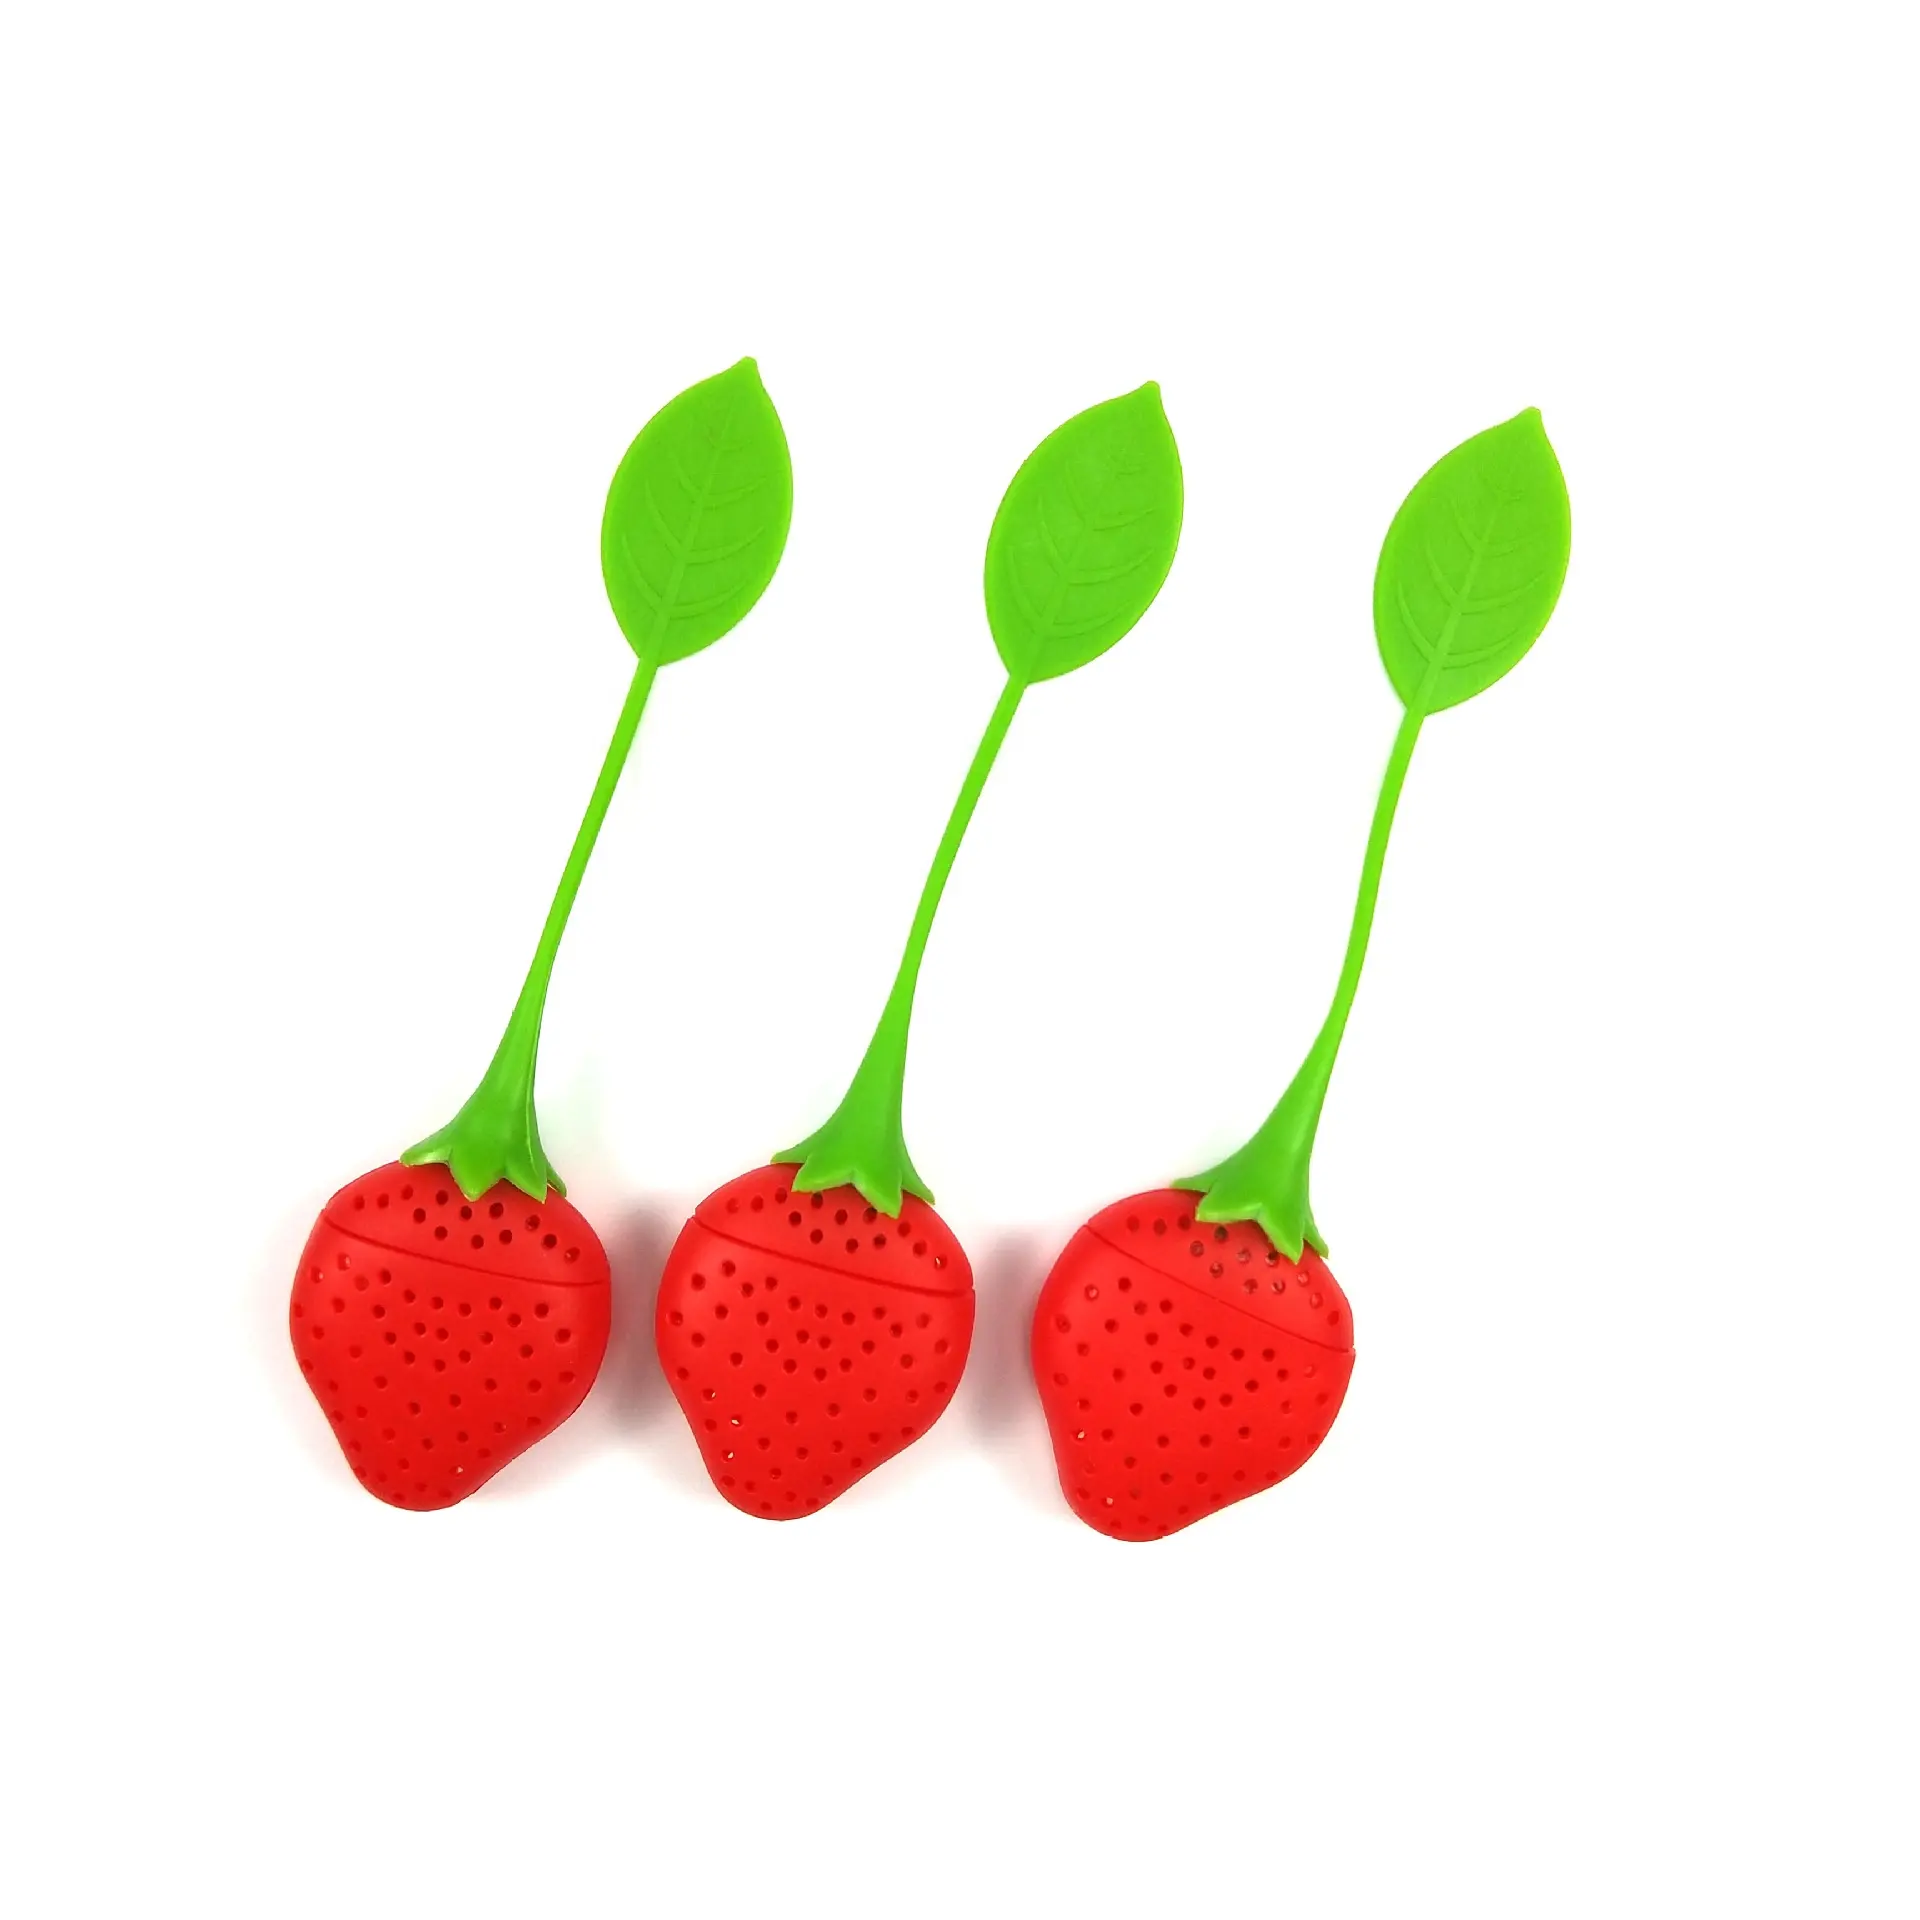 Lovely Silicone Strawberry Tea Infuser Strainer Reusable Tea Filter for Loose Tea